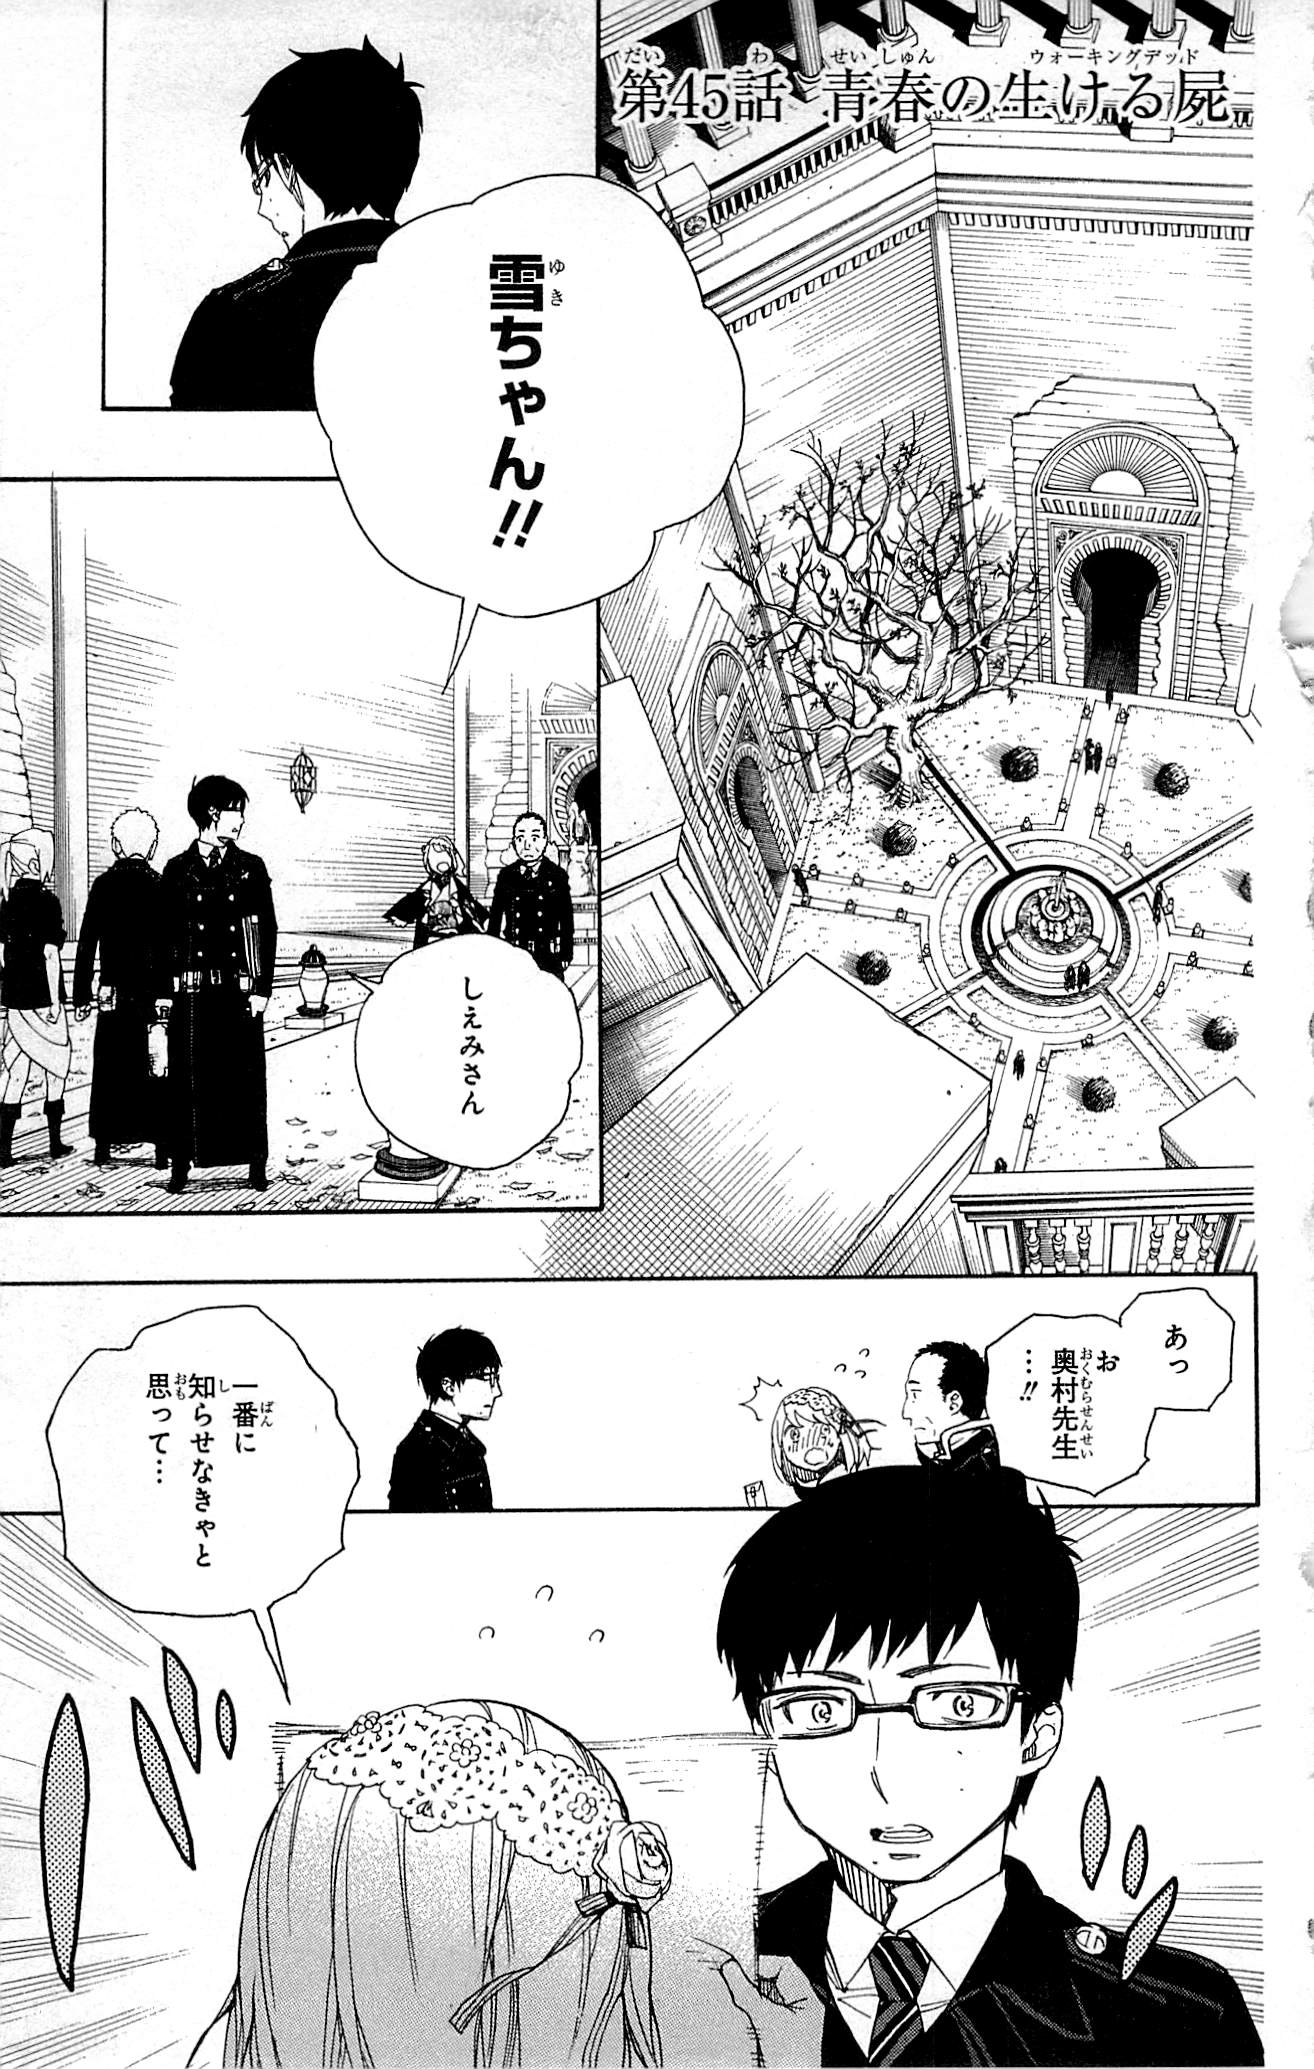 Ao no Exorcist - Chapter 45 - Page 1